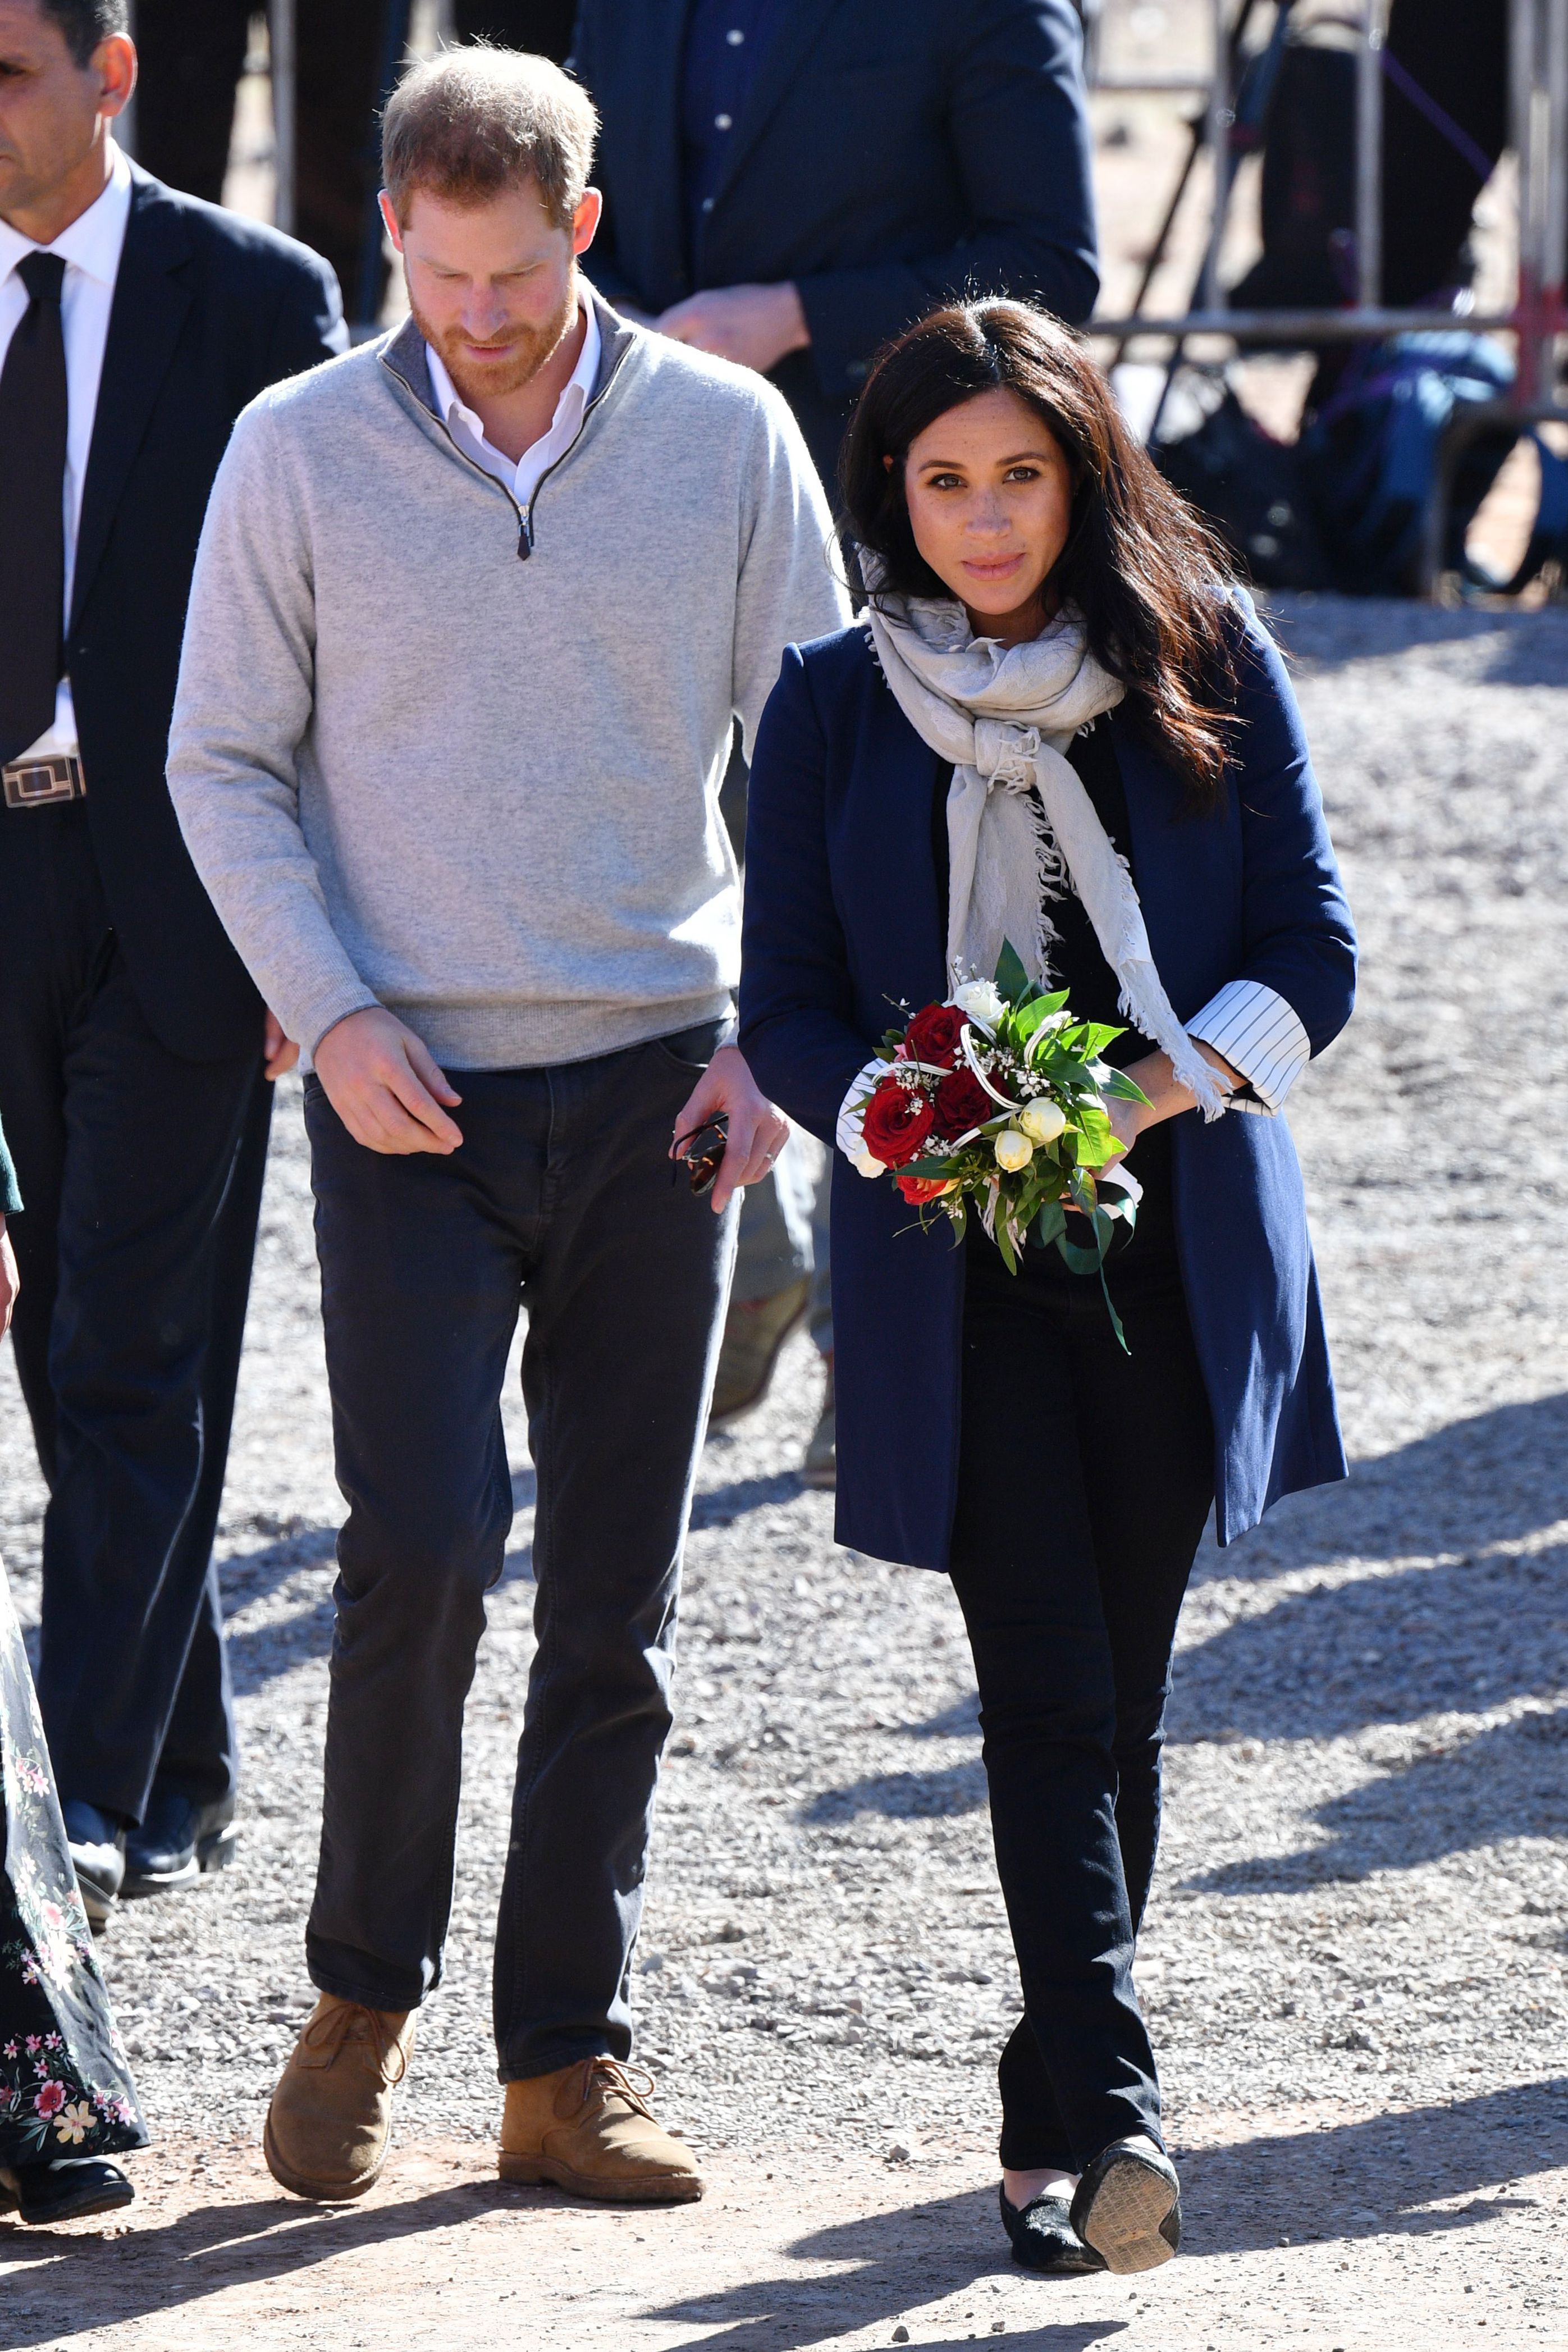 Prince Harry and Meghan Markle walking together, Meghan holding flowers, both dressed in casual attire